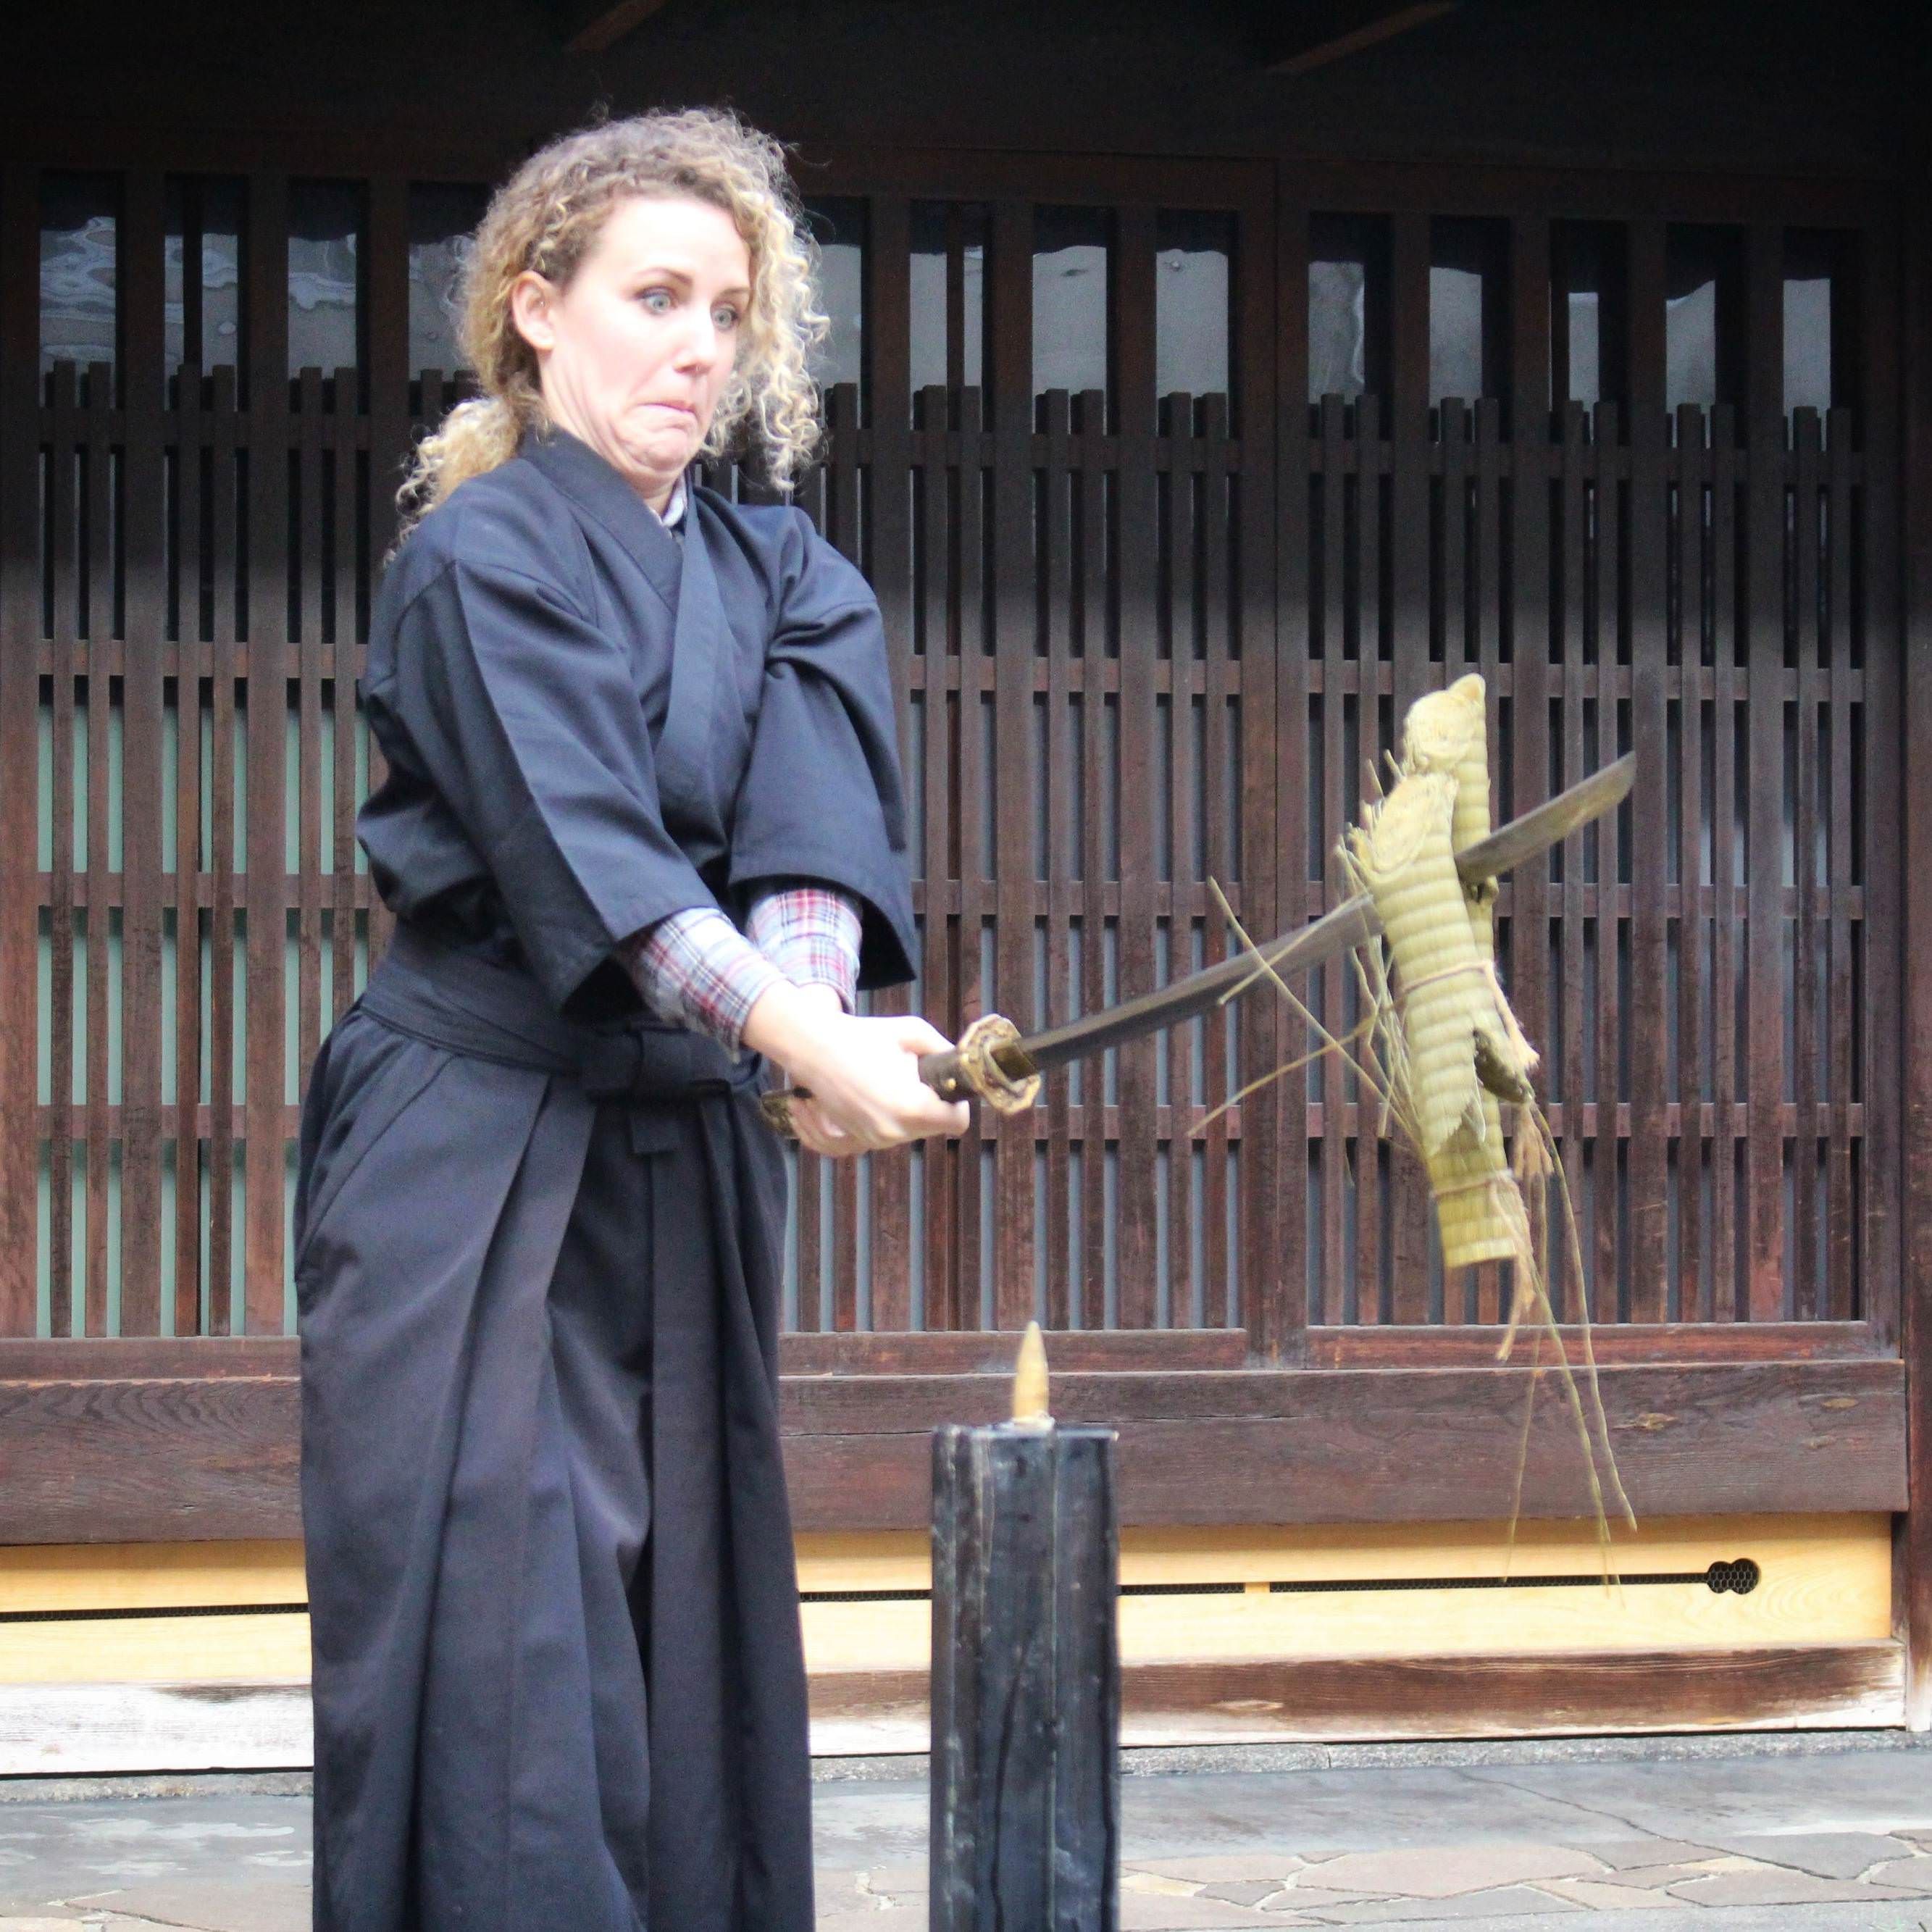 Go to the Samurai experience in Kyoto, they said. You'll learn to weild a sword like a badass, they said.